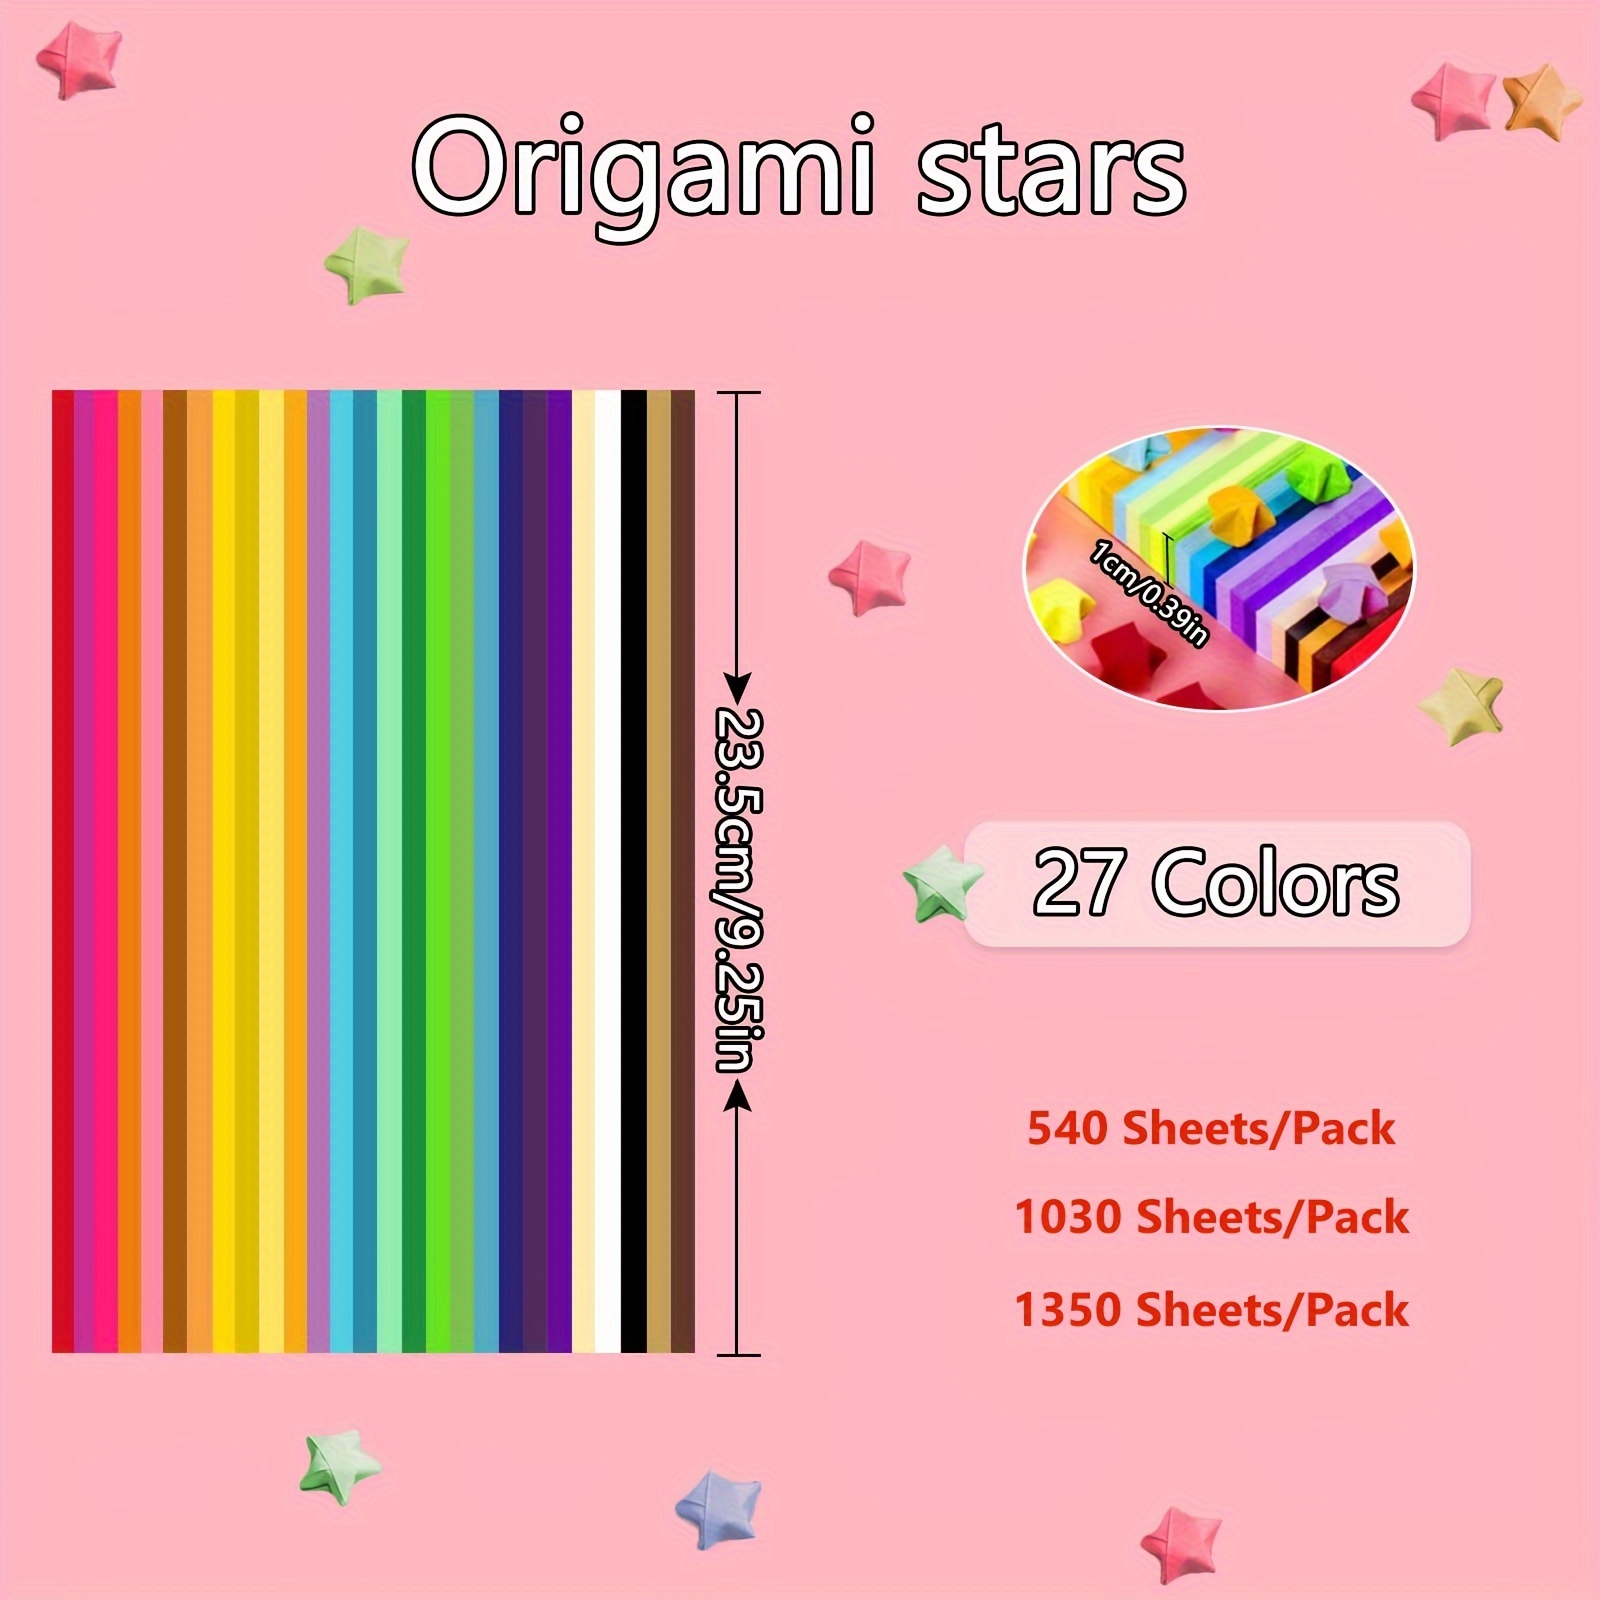 1030 Sheets 27 Colors Origami Stars Paper Strips, Origami Paper Stars,  Color Star Paper Strip, DIY Paper Origami Stars, Origami Star Paper Strips